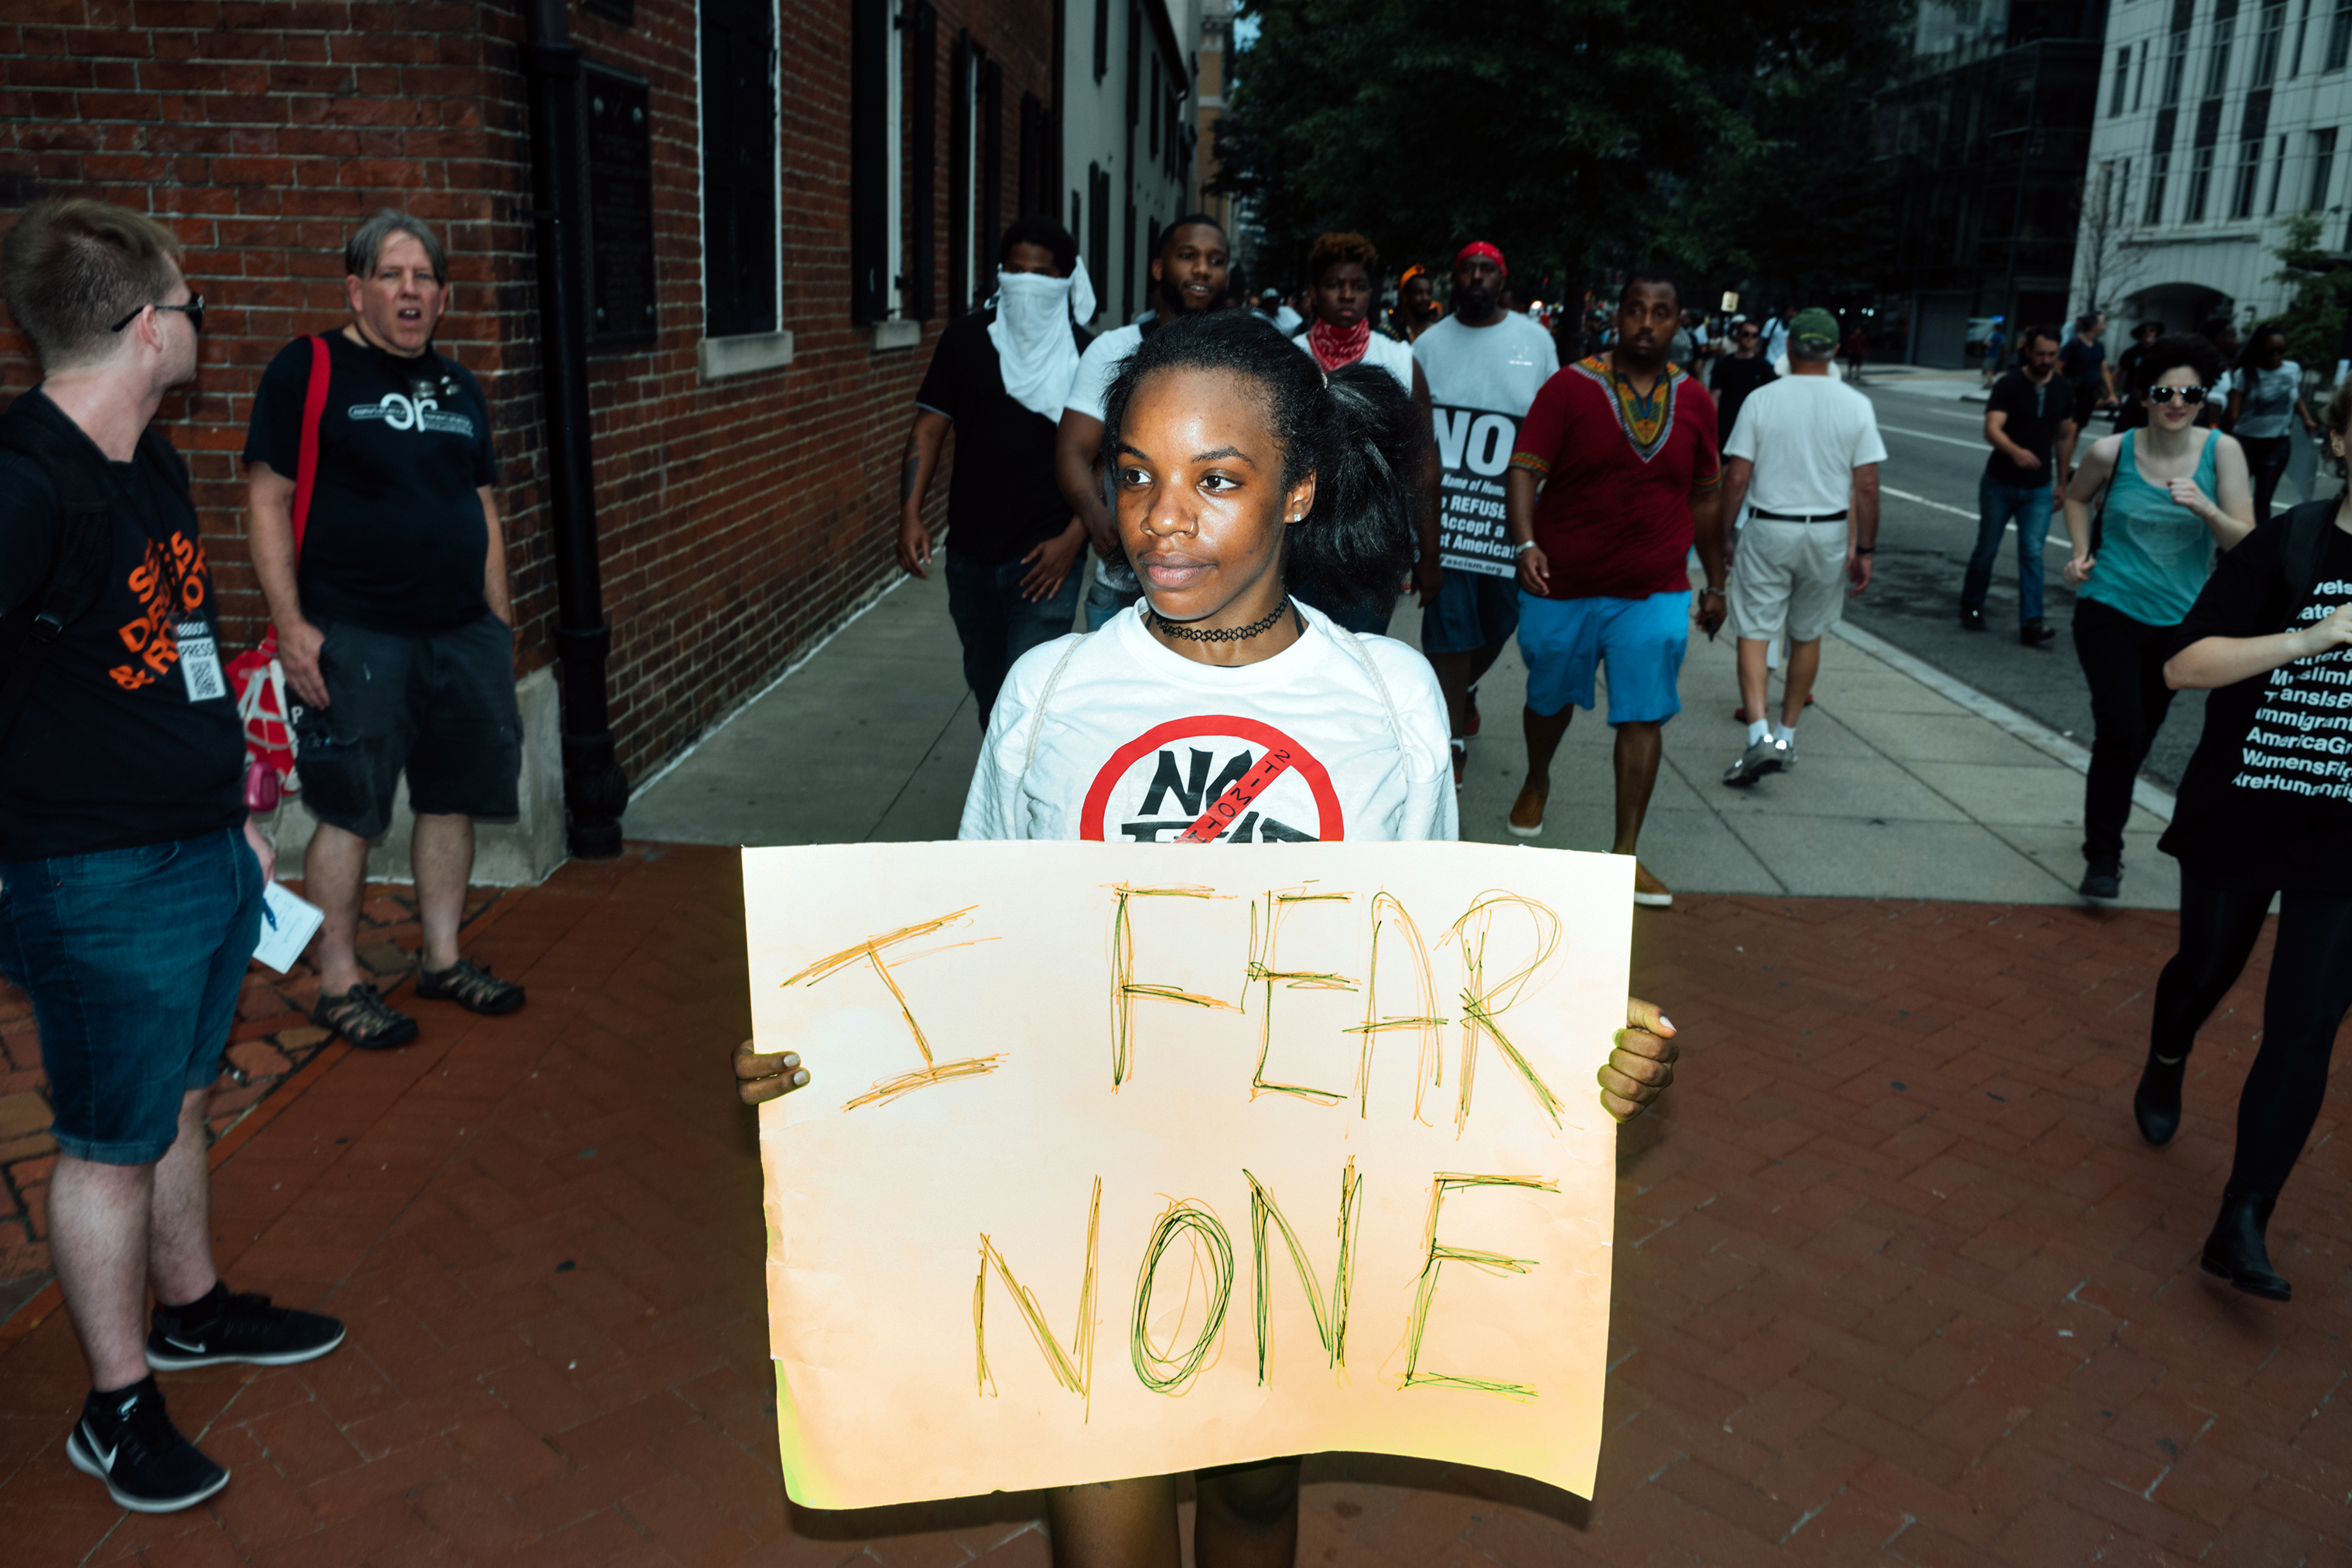 A young counter-protester, among the more than 1,000 who showed up to oppose the Unite the Right 2 rally. (Daniel Arnold for TIME)